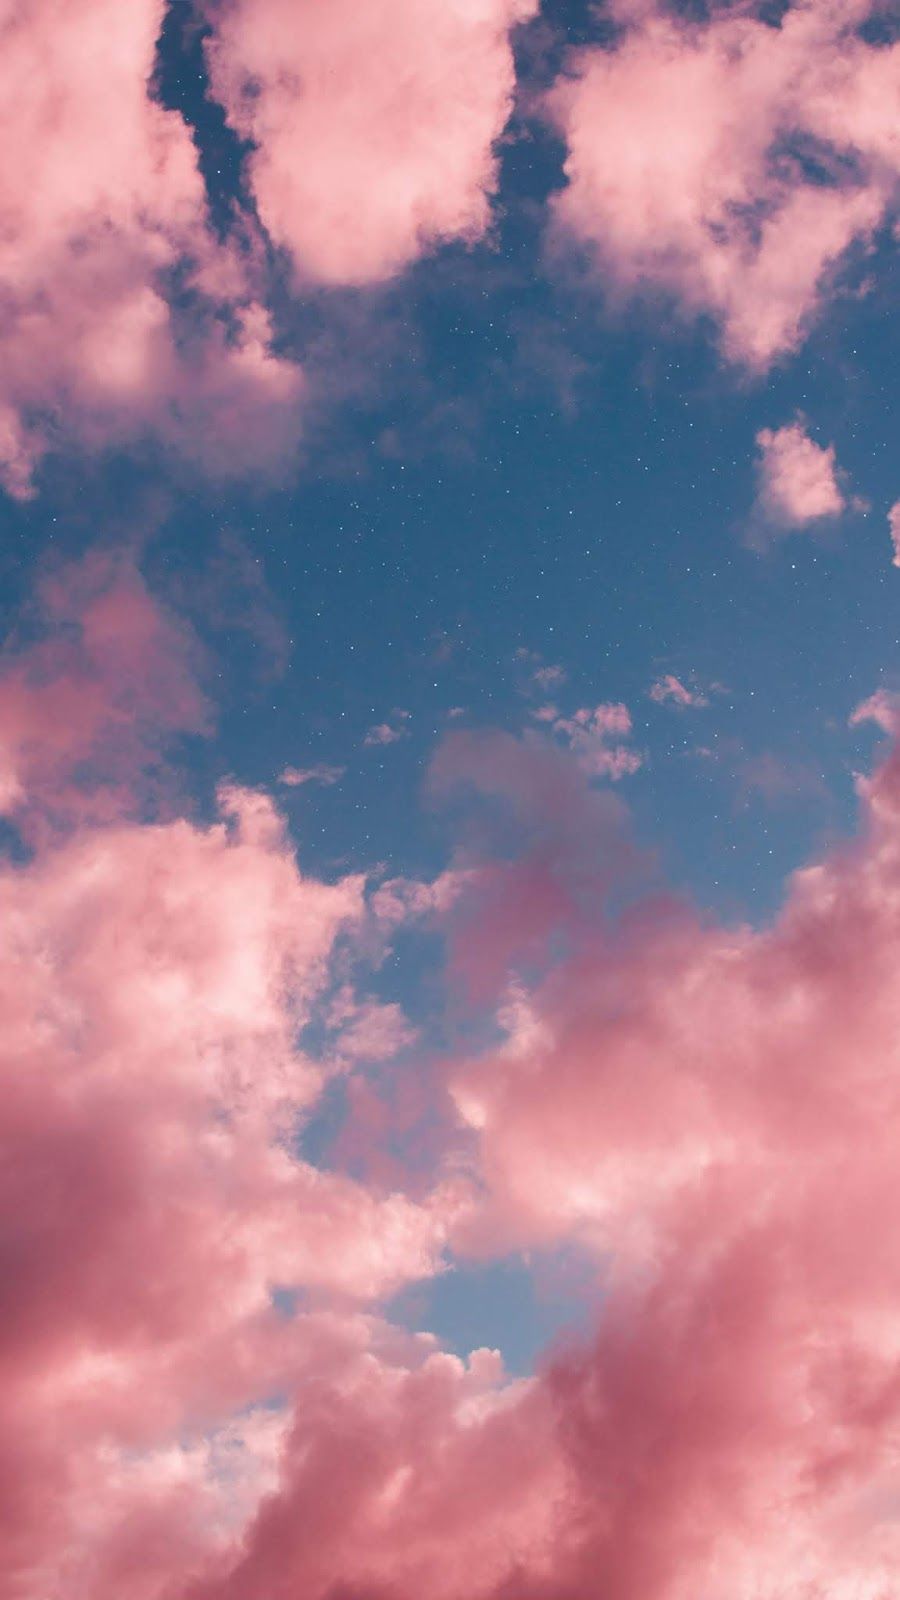 Pink sky #wallpaper #iphone #android #background #followme. Pink clouds wallpaper, Night sky wallpaper, Pink wallpaper iphone